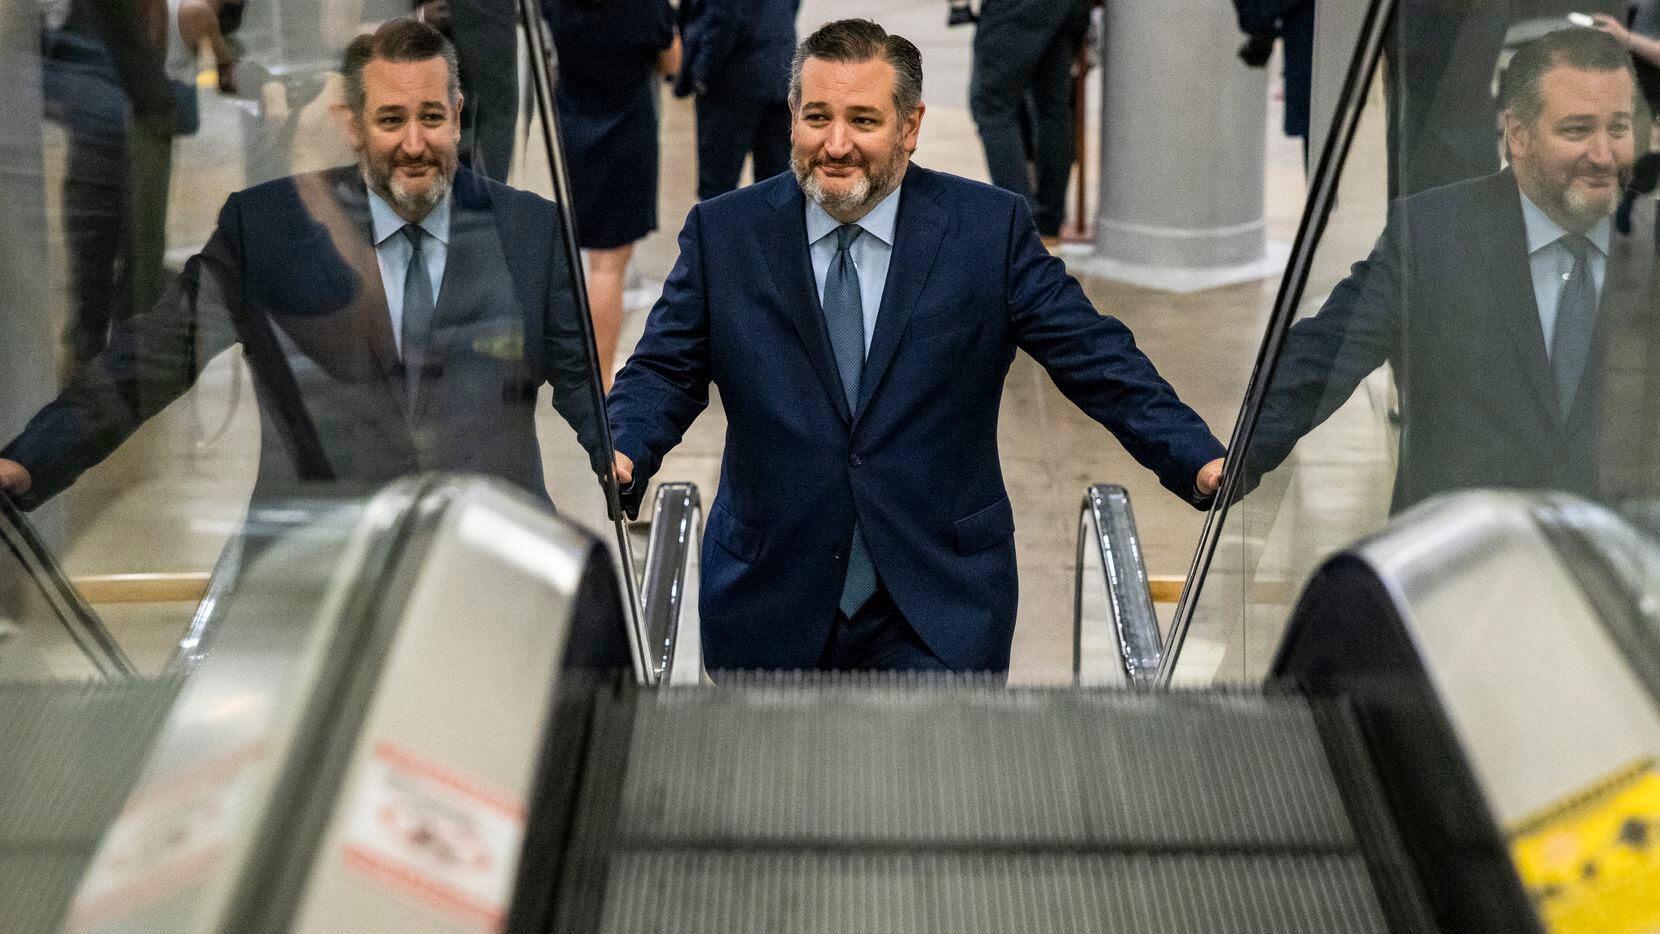 Sen. Ted Cruz  heads to a vote on June 8, 2021, as Democrats and Republicans continuing negotiations on President Joe Bidens infrastructure plan.